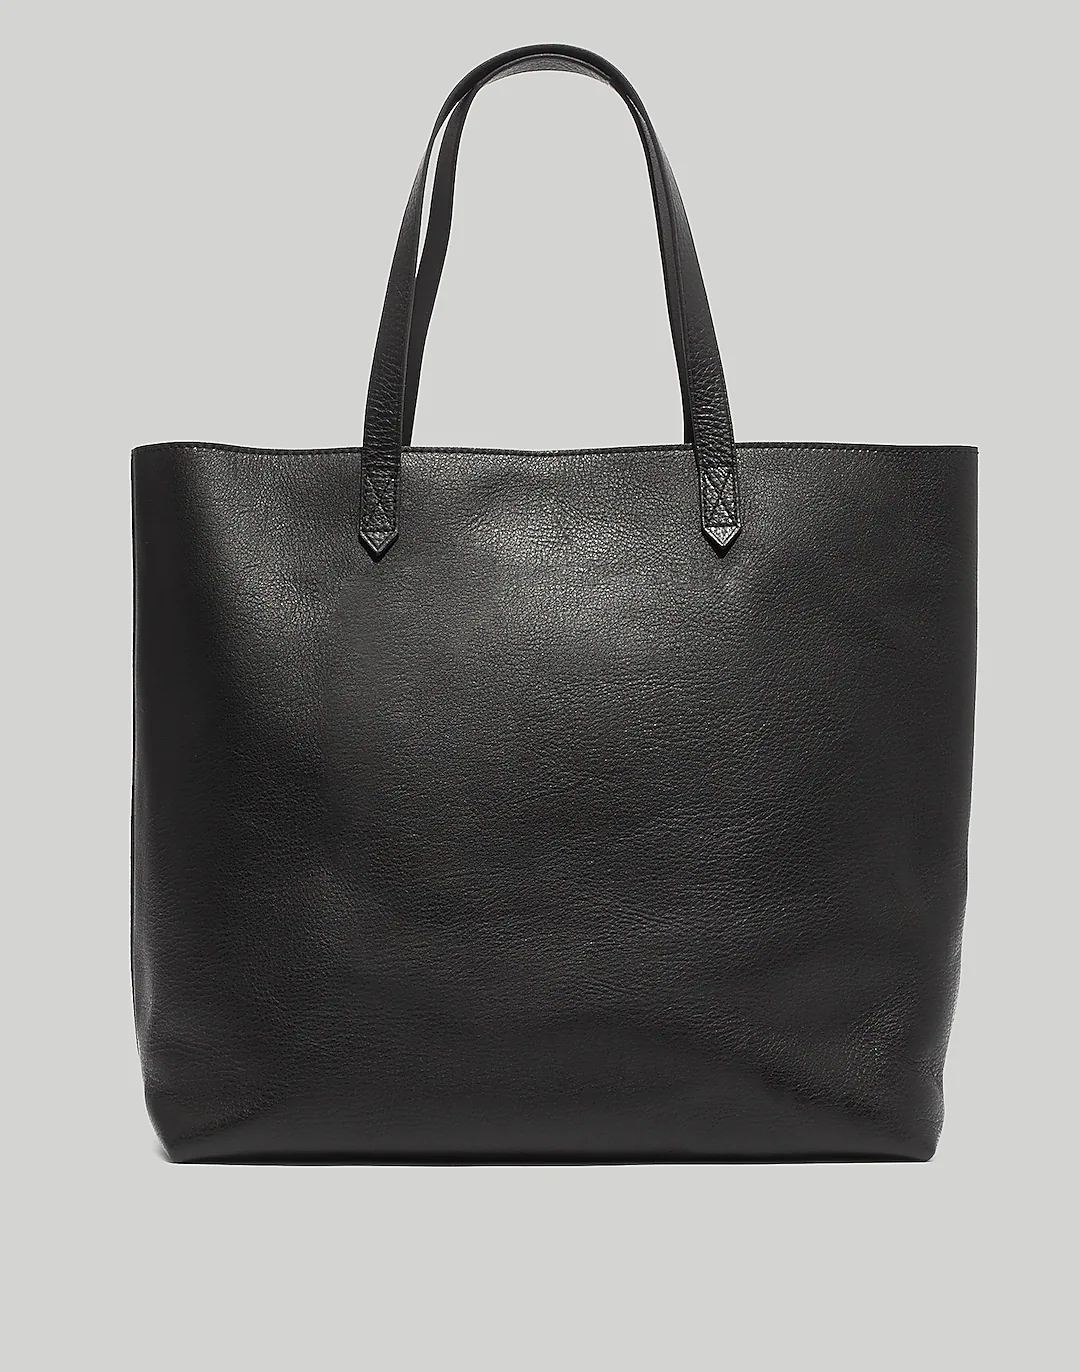 The Zip-Top Transport Tote from Madewell